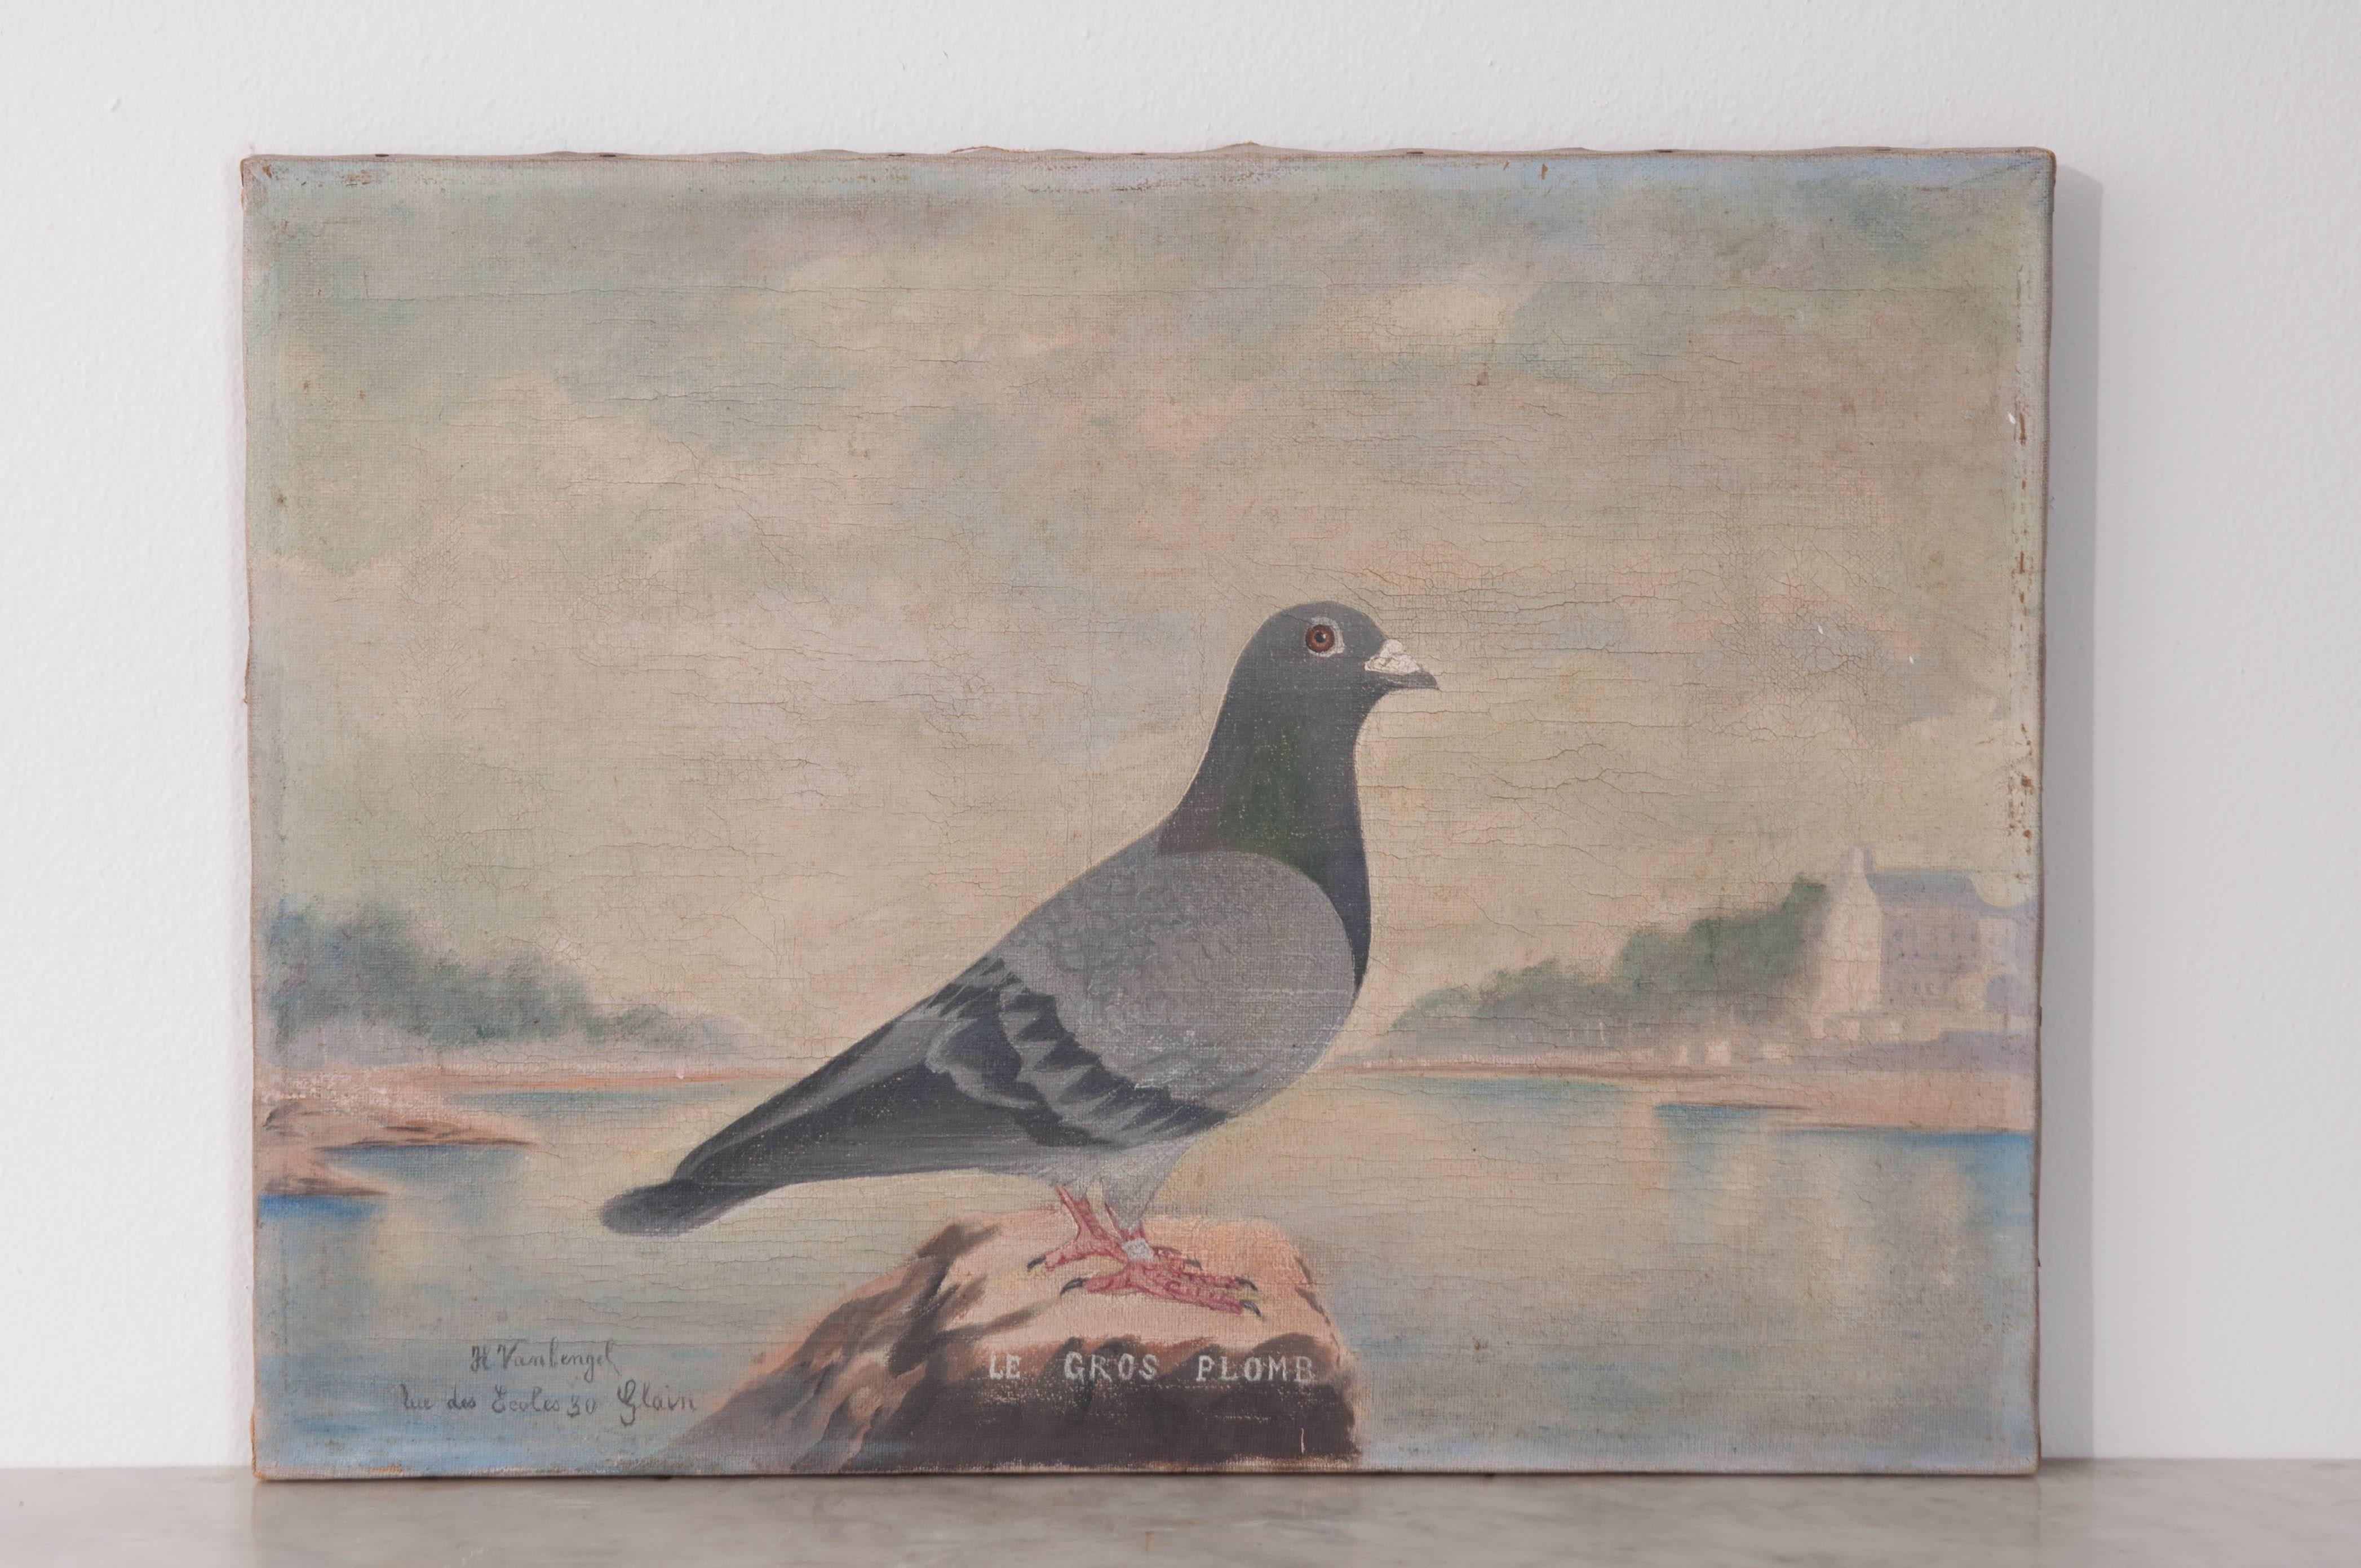 A stunning antique painting from 19th century, France. The work depicts a single pigeon that has been banded. The pigeon is a racing pigeon. Beginning in England and Belgium during the 19th century, pigeon racing quickly caught on and spread